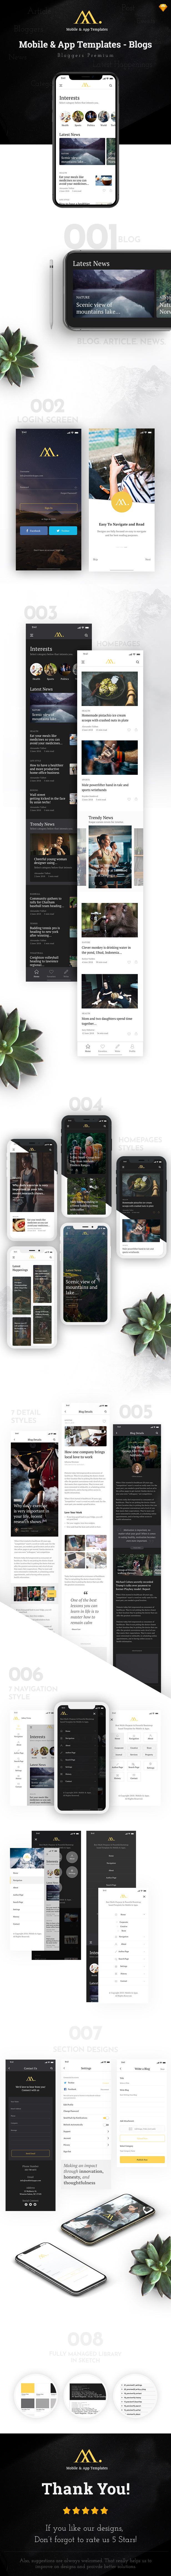 Mobile & App Templates - Blogs in Sketch - 1